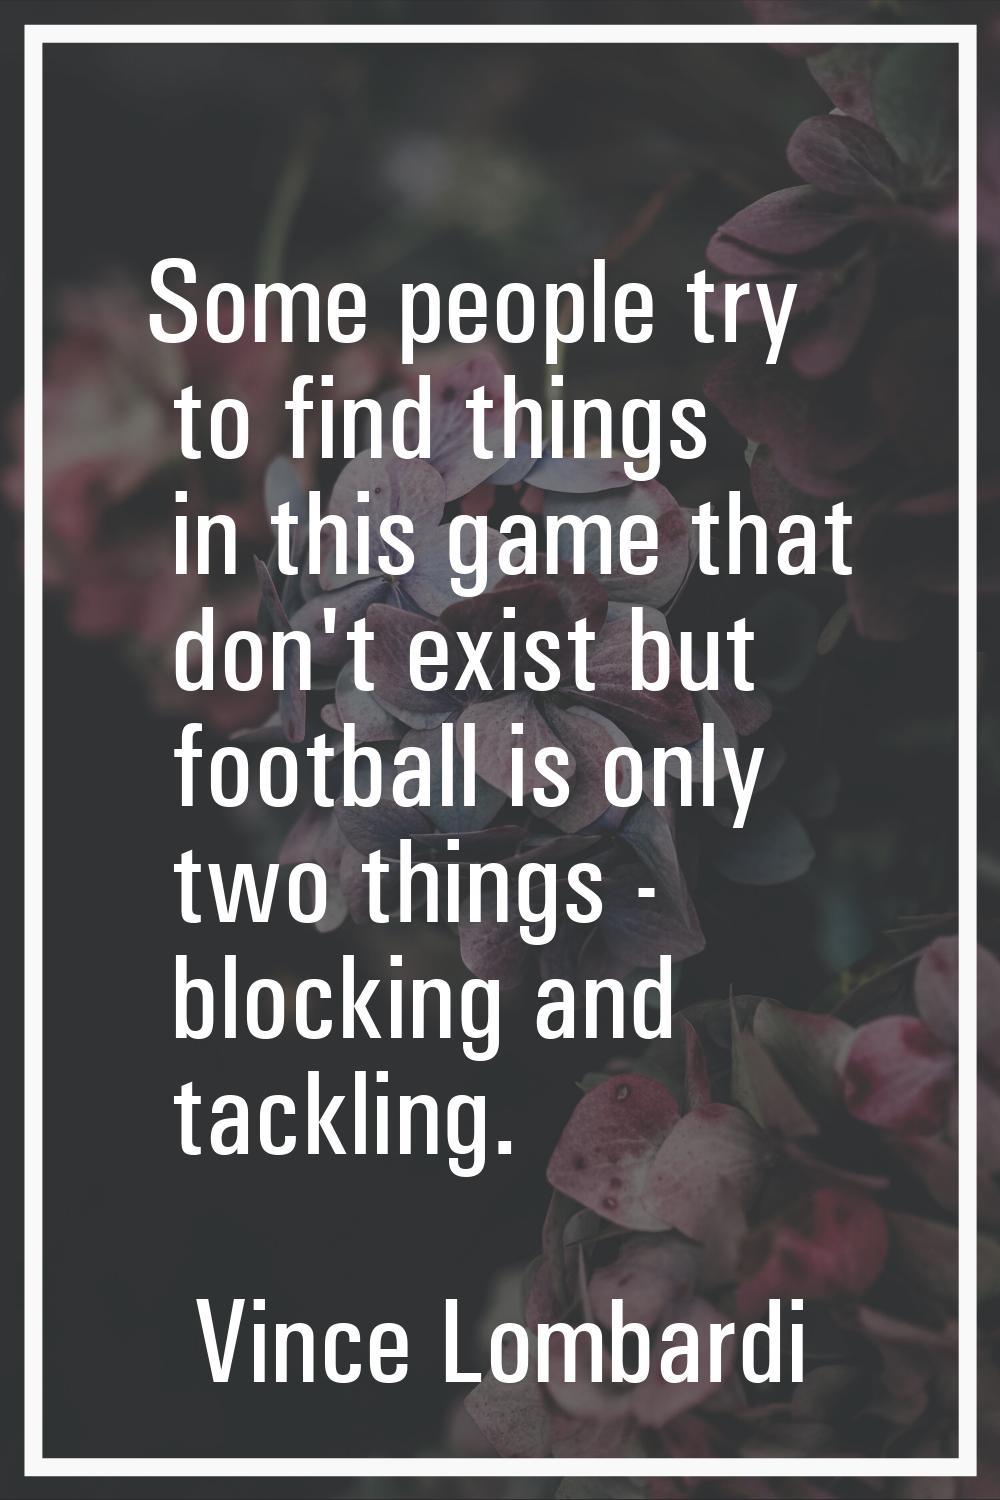 Some people try to find things in this game that don't exist but football is only two things - bloc